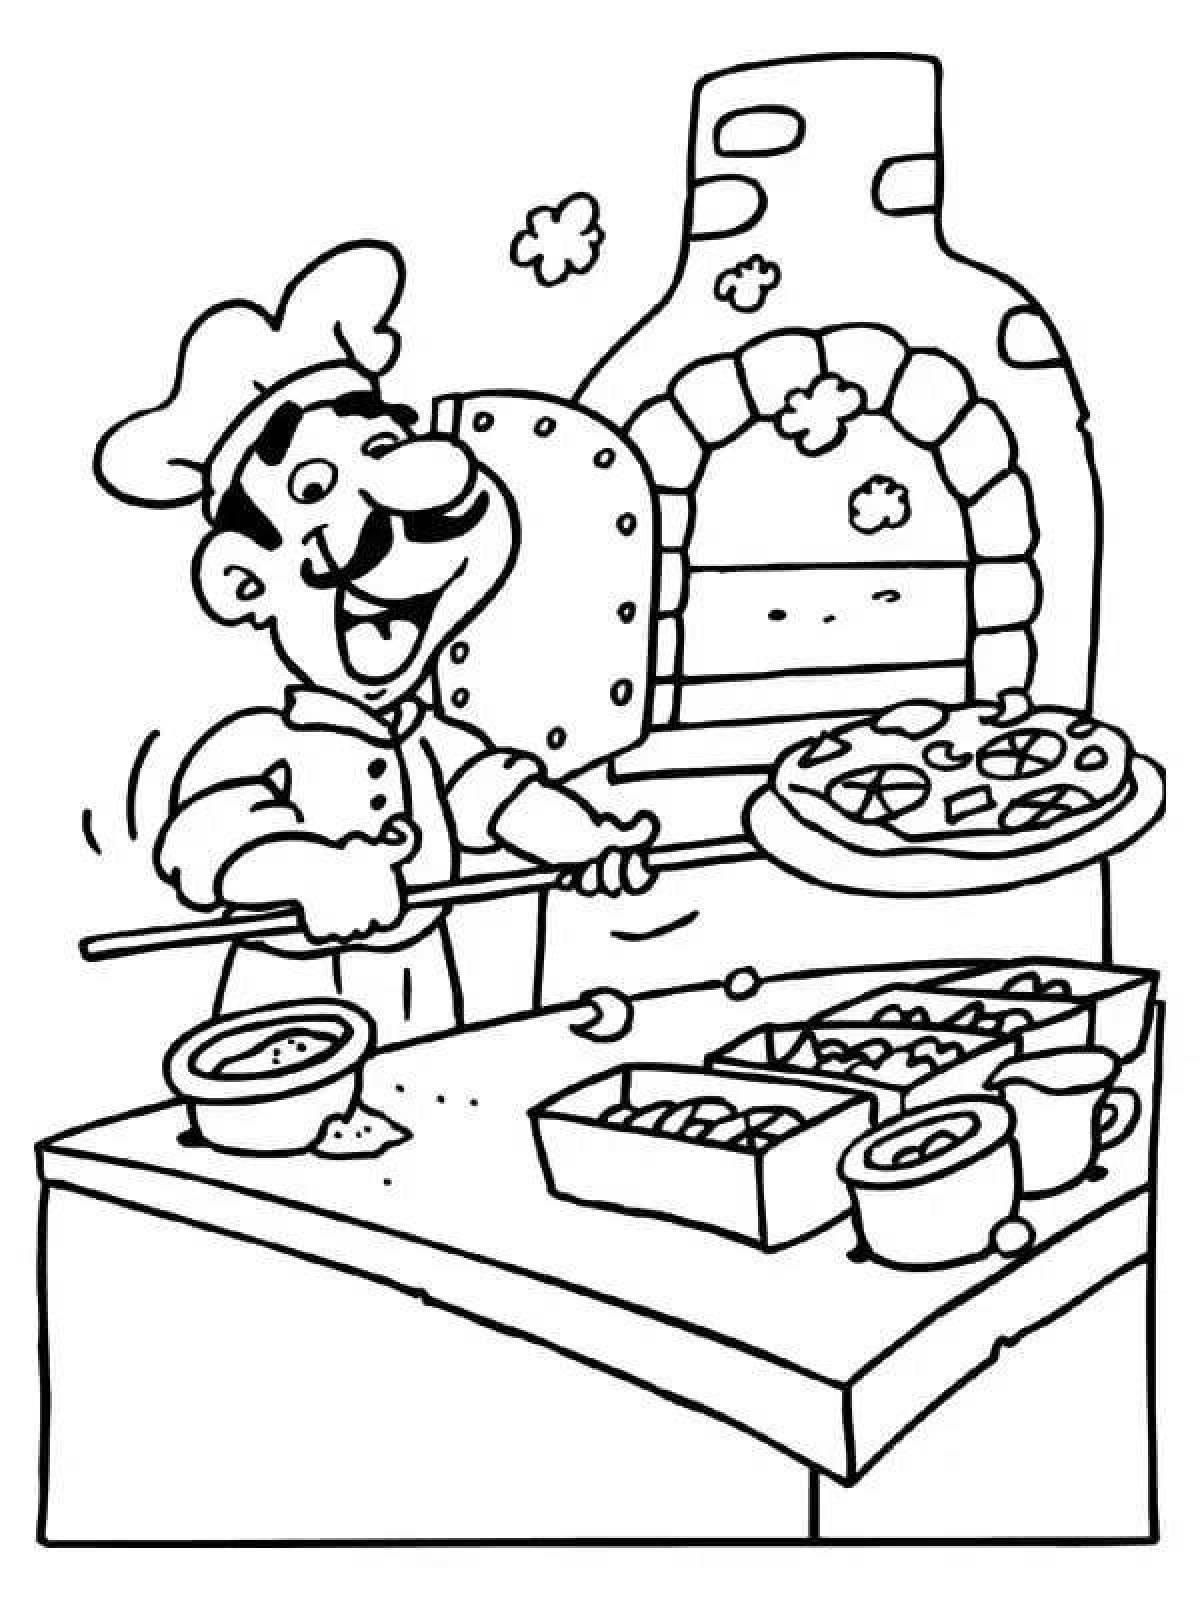 Coloring page stimulating pizzeria